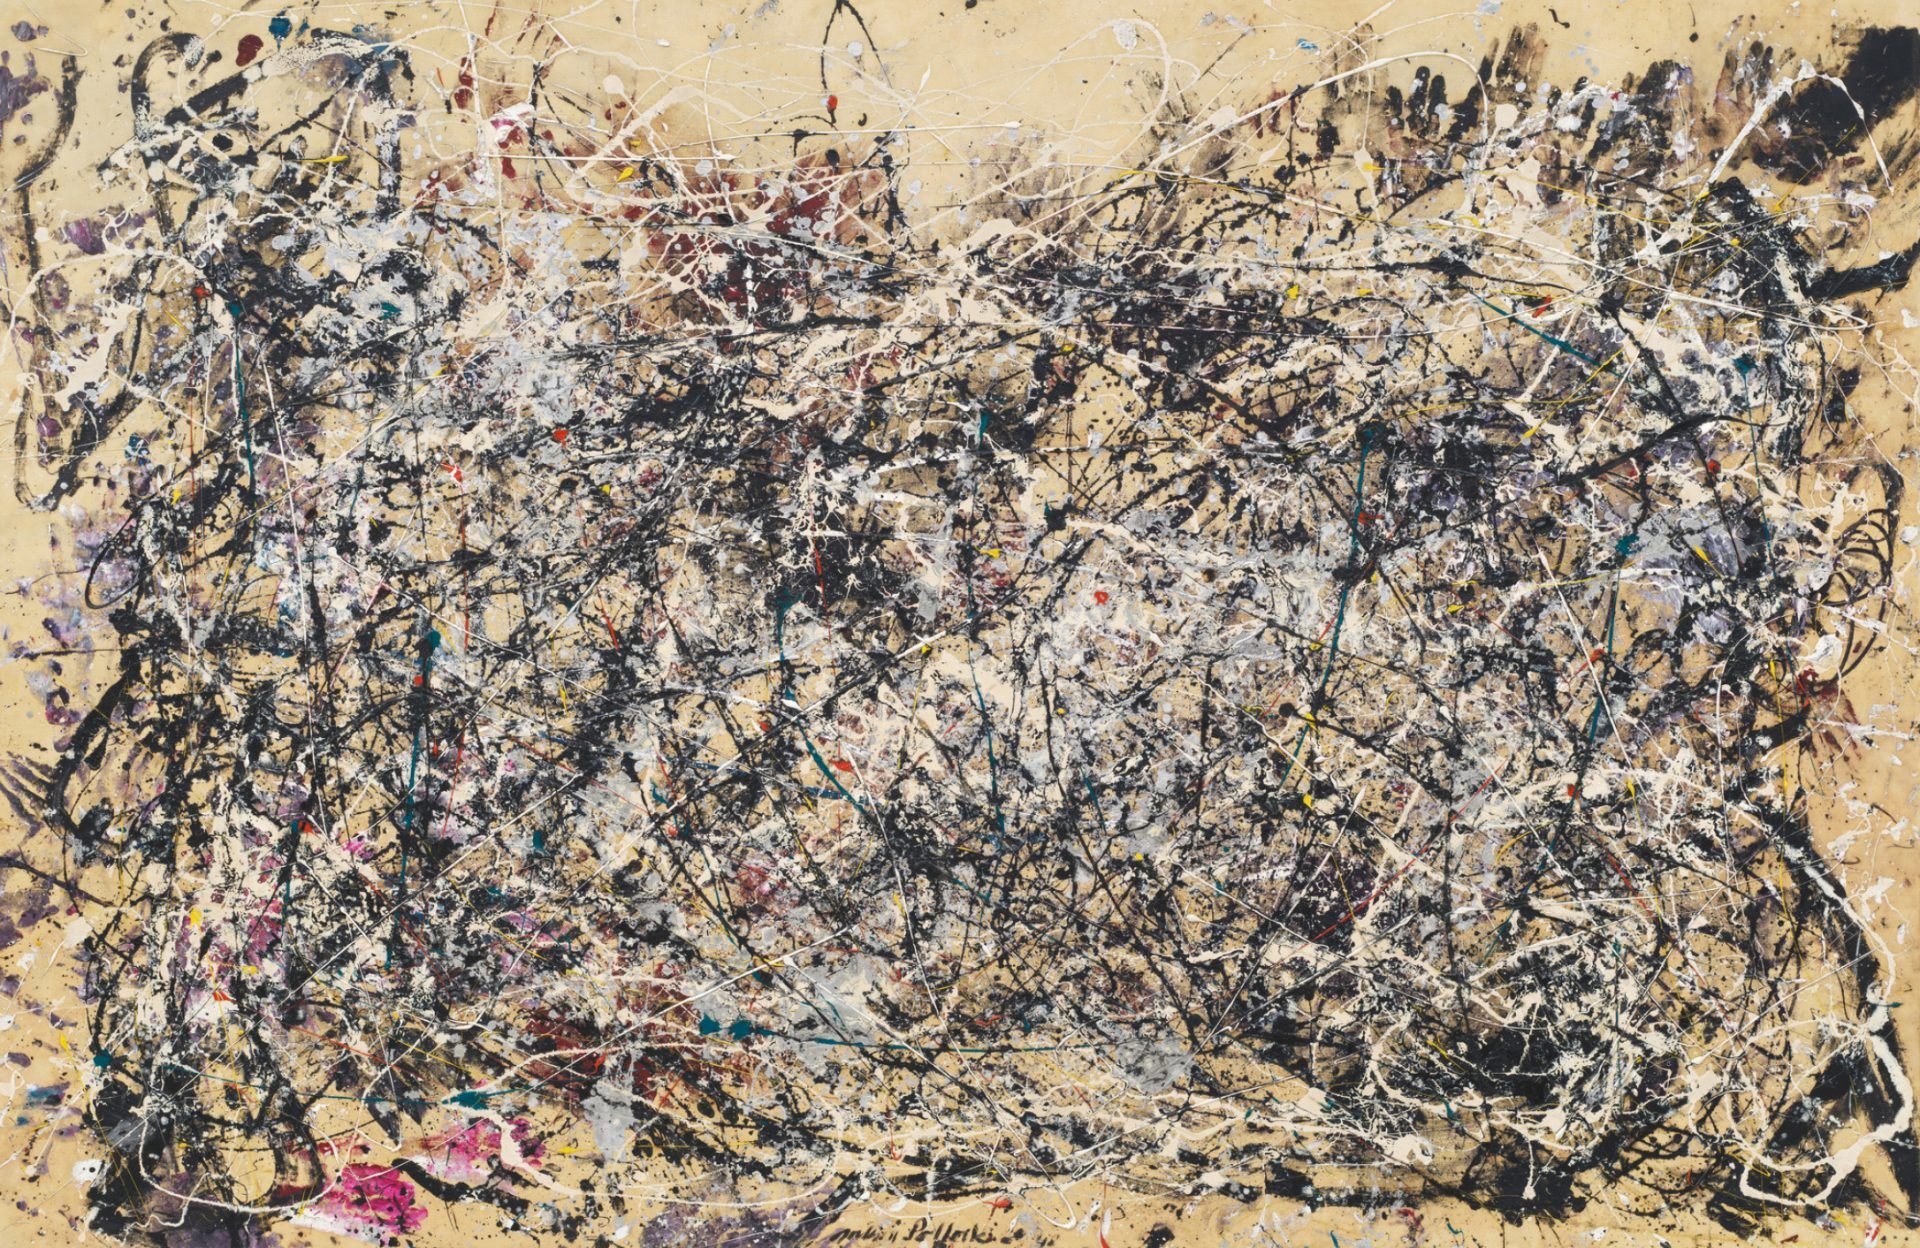 An abstract painting by Jackson Pollock with a chaotic web of black, white, and colored lines and splatters.